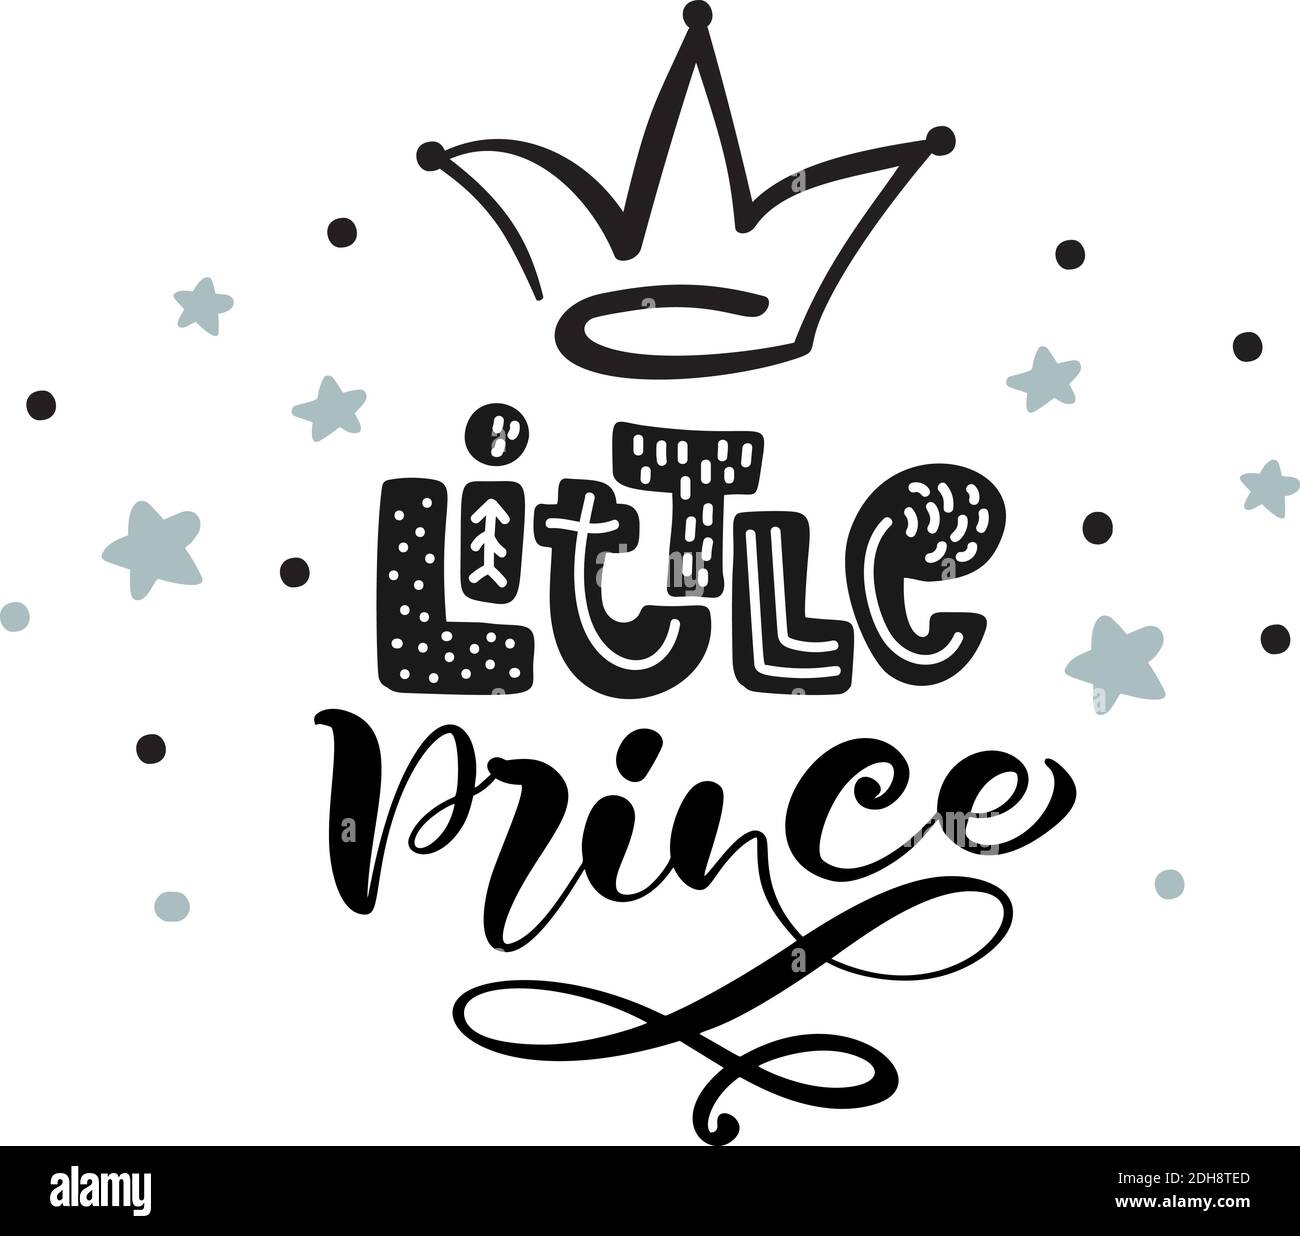 Little prince calligraphy lettering hand drawn scandinavian illustration with crown and stars. Blue and black decorative background vector. Poster Stock Vector